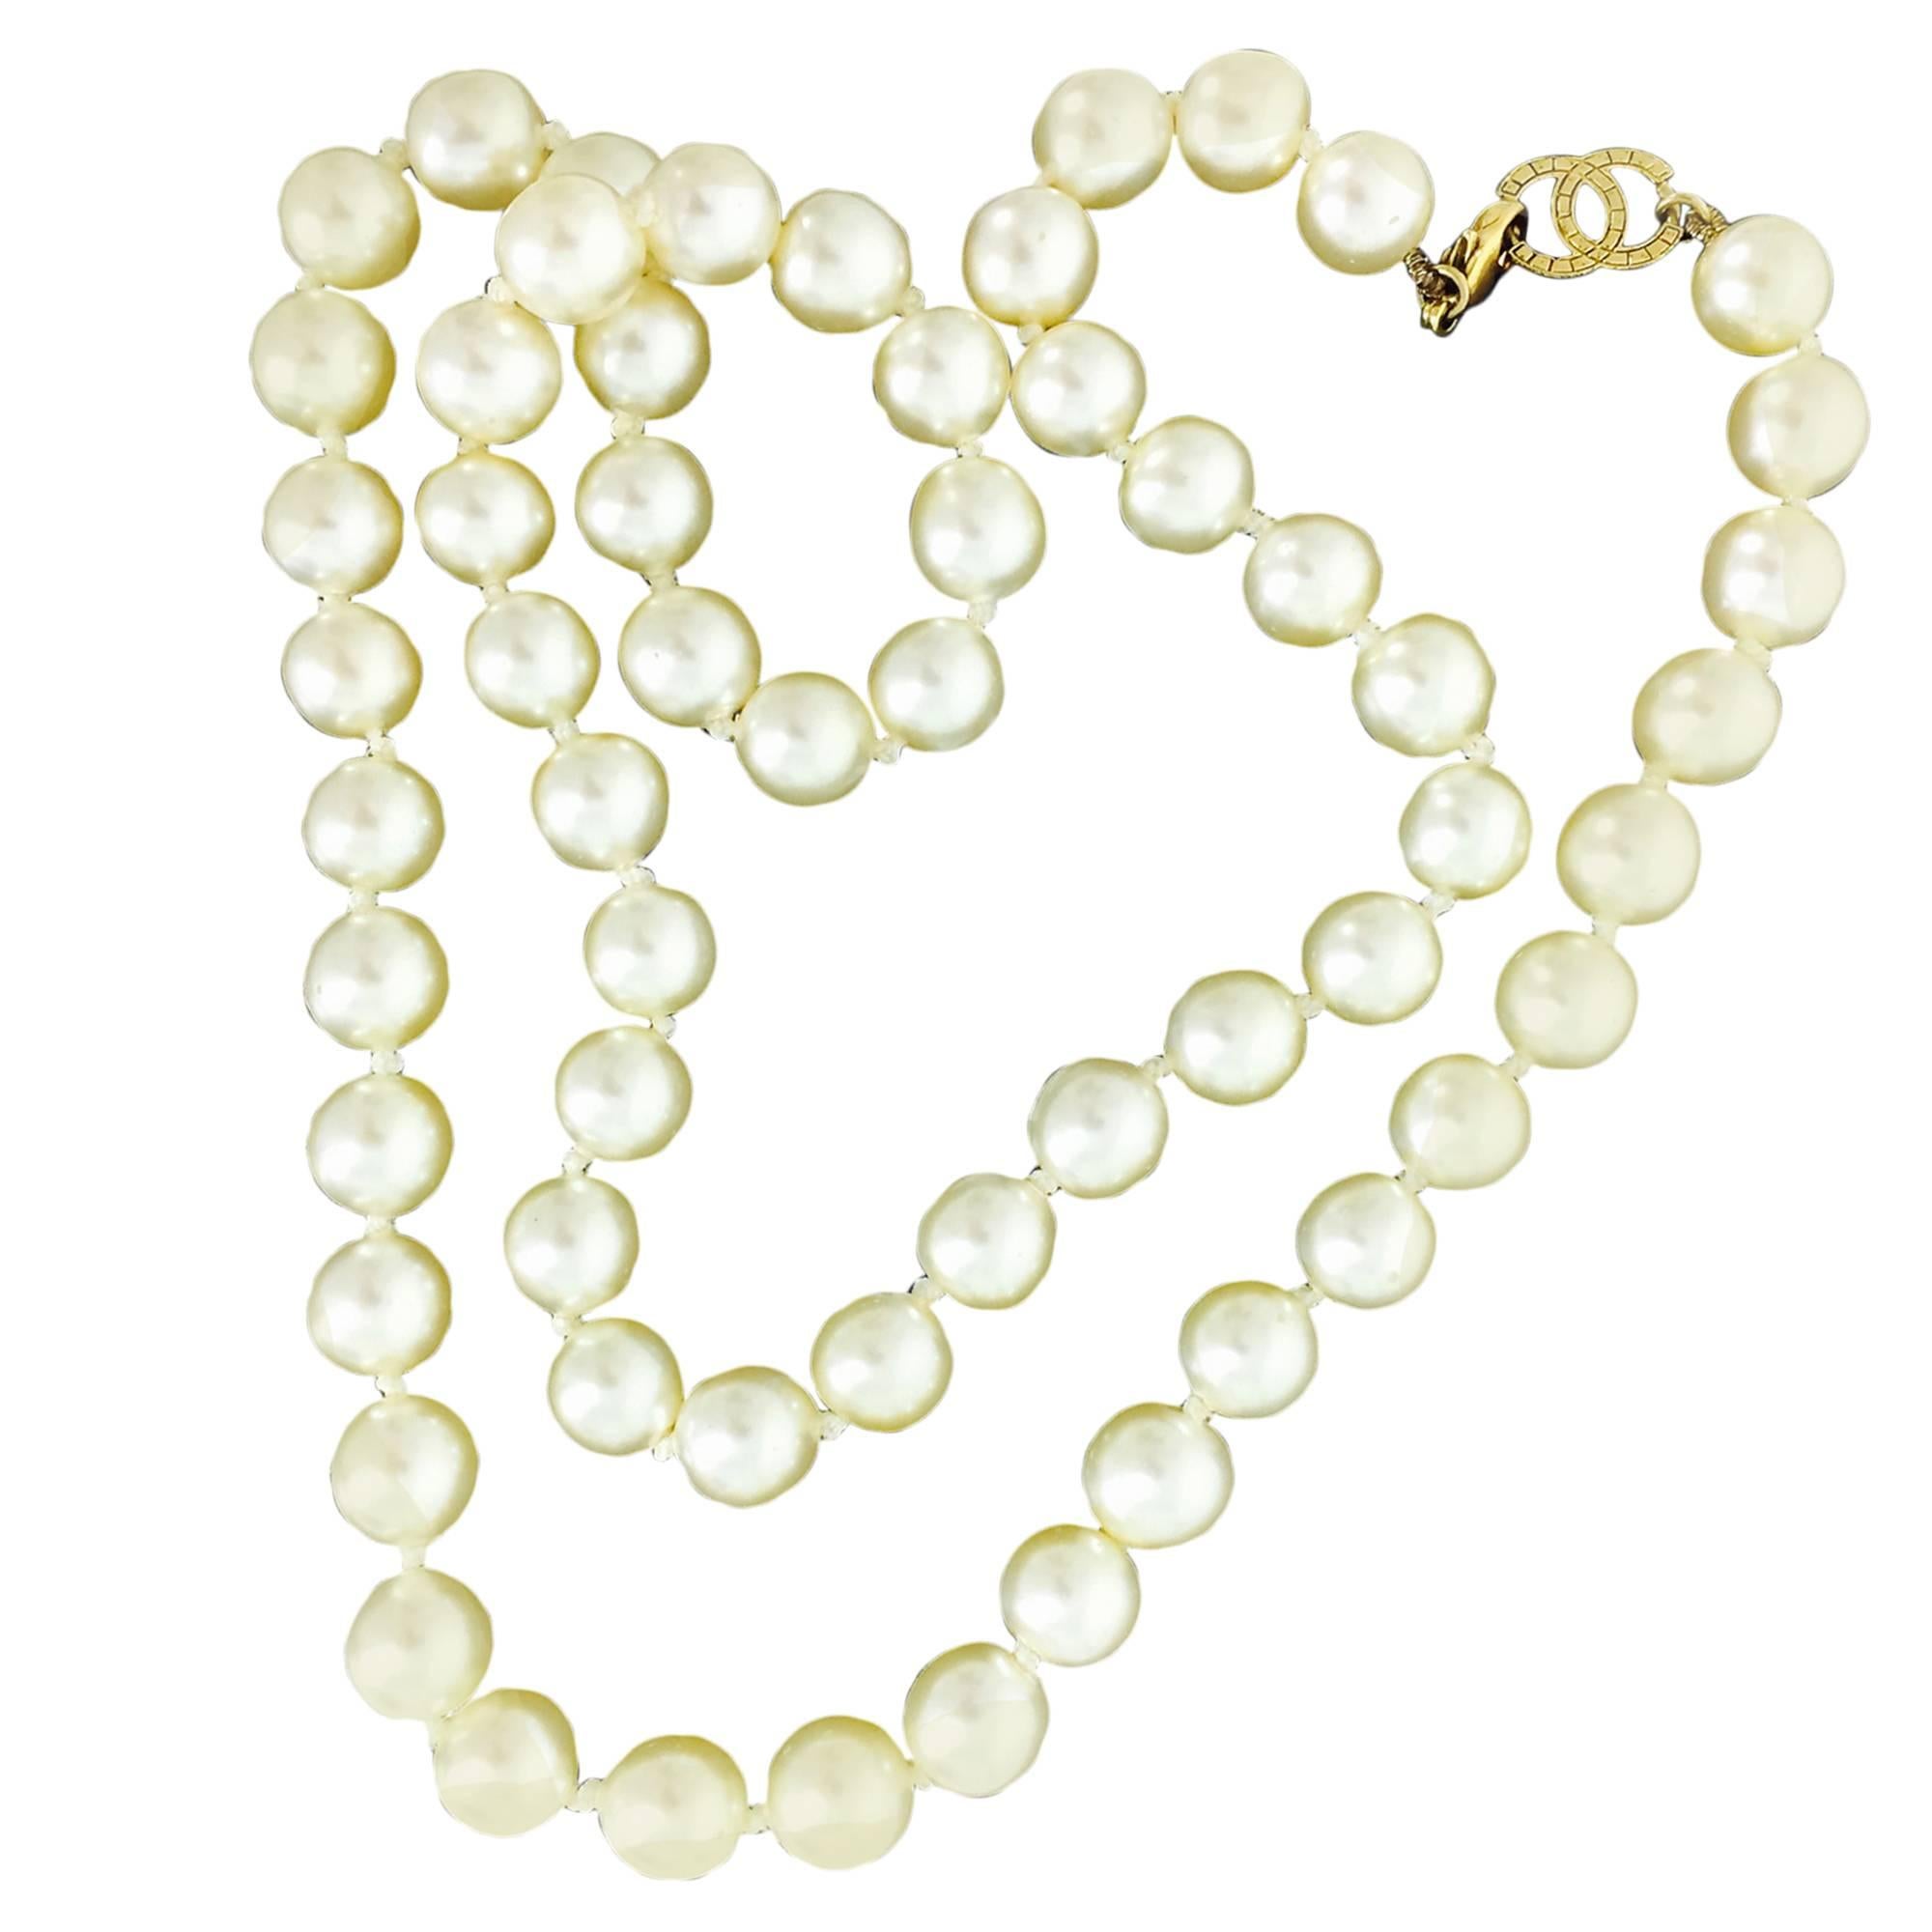 Chanel 2008 large and 16" long pearl necklace